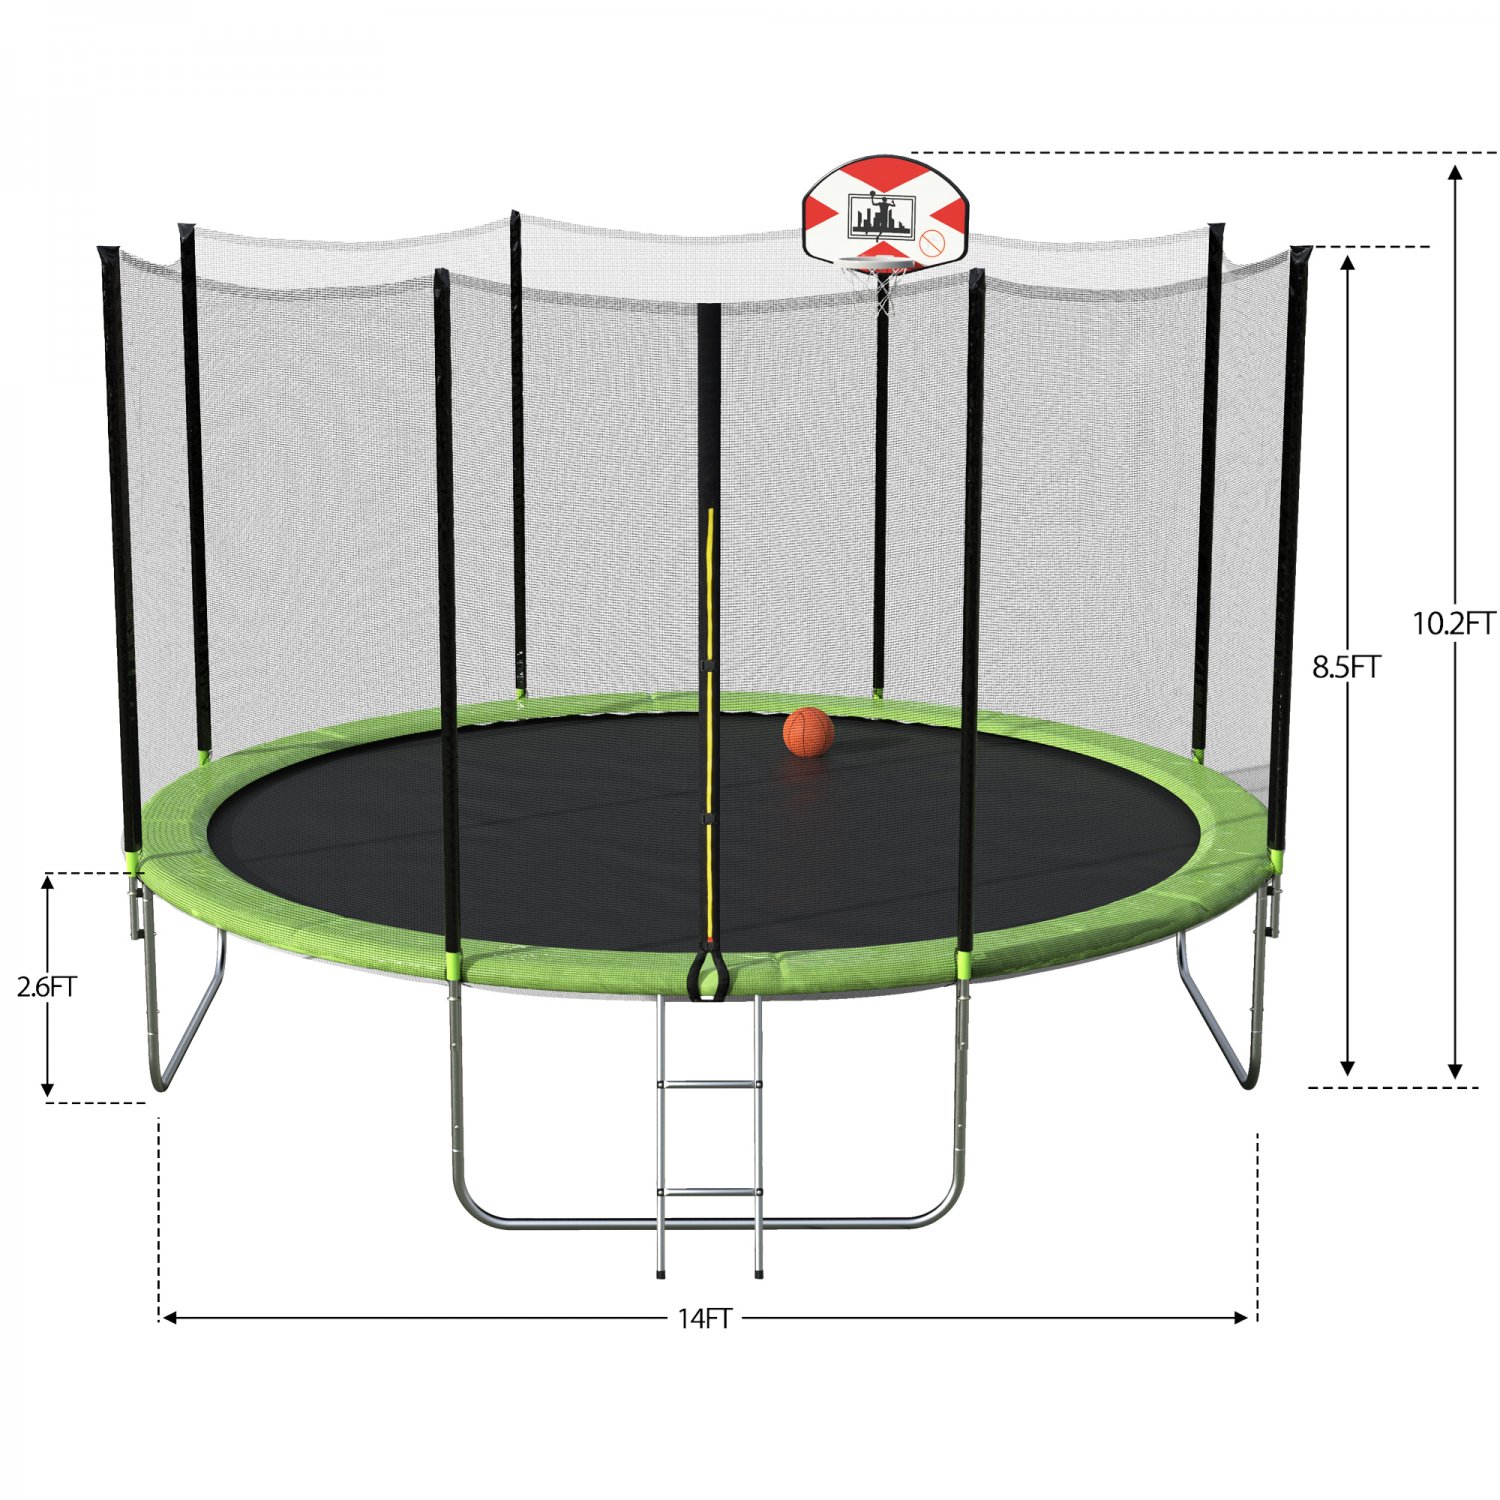 EUROCO 14' Trampoline with Basketball Hoop and Enclosure